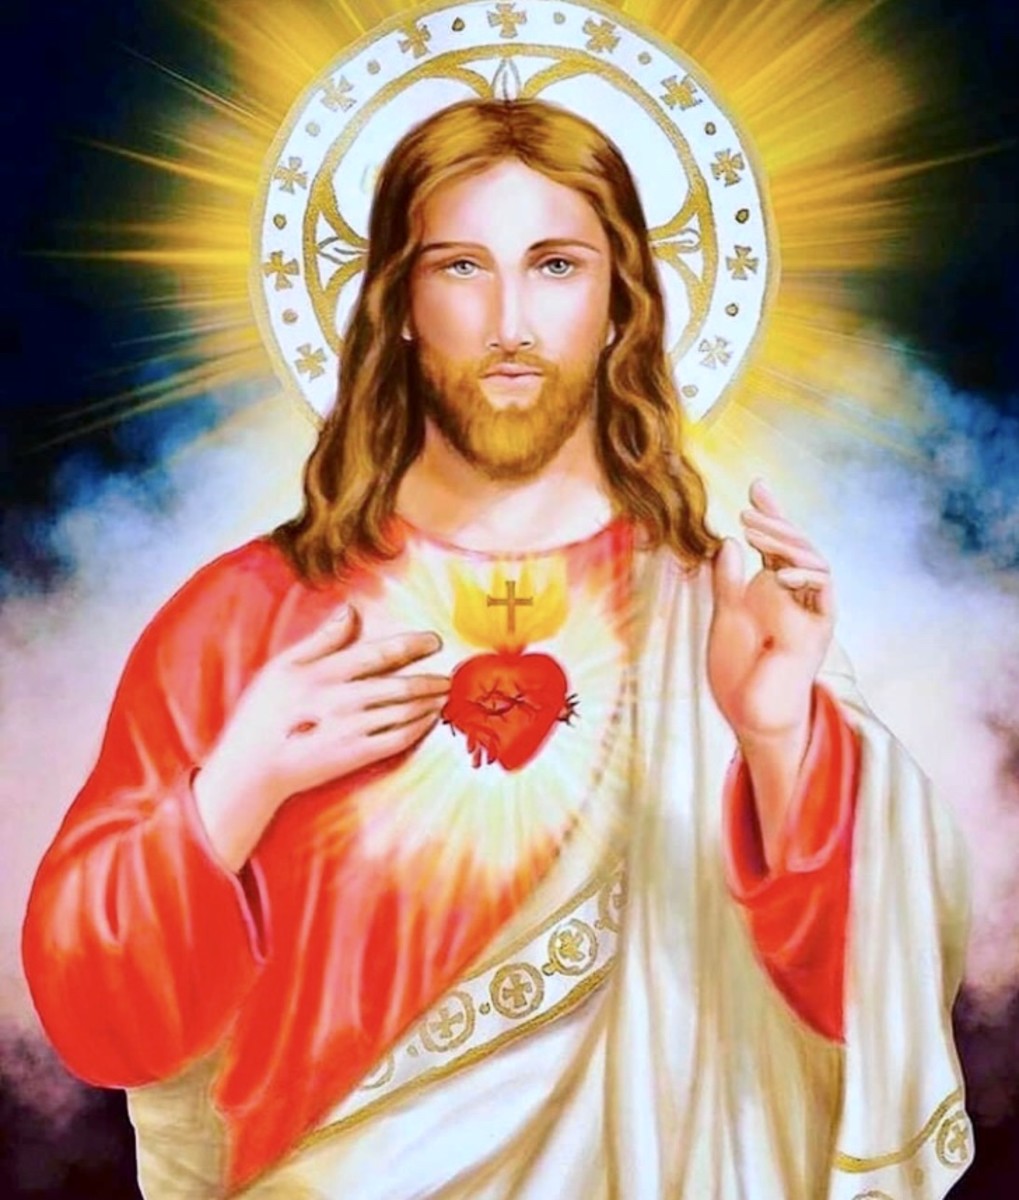 The Solemnity of the Most Sacred Heart of Jesus